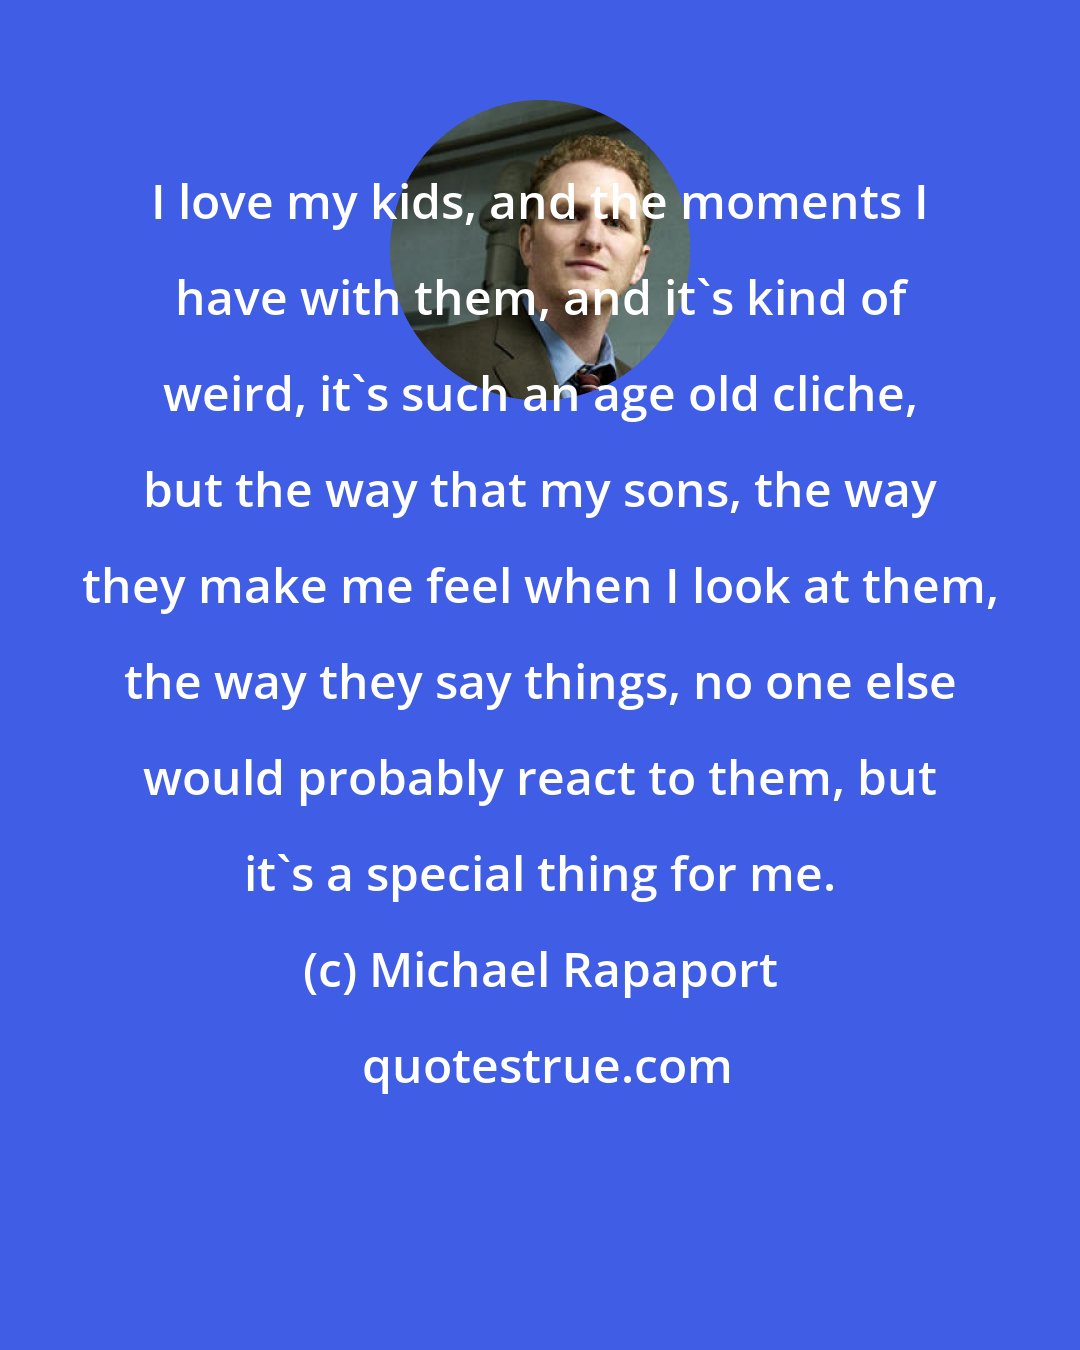 Michael Rapaport: I love my kids, and the moments I have with them, and it's kind of weird, it's such an age old cliche, but the way that my sons, the way they make me feel when I look at them, the way they say things, no one else would probably react to them, but it's a special thing for me.